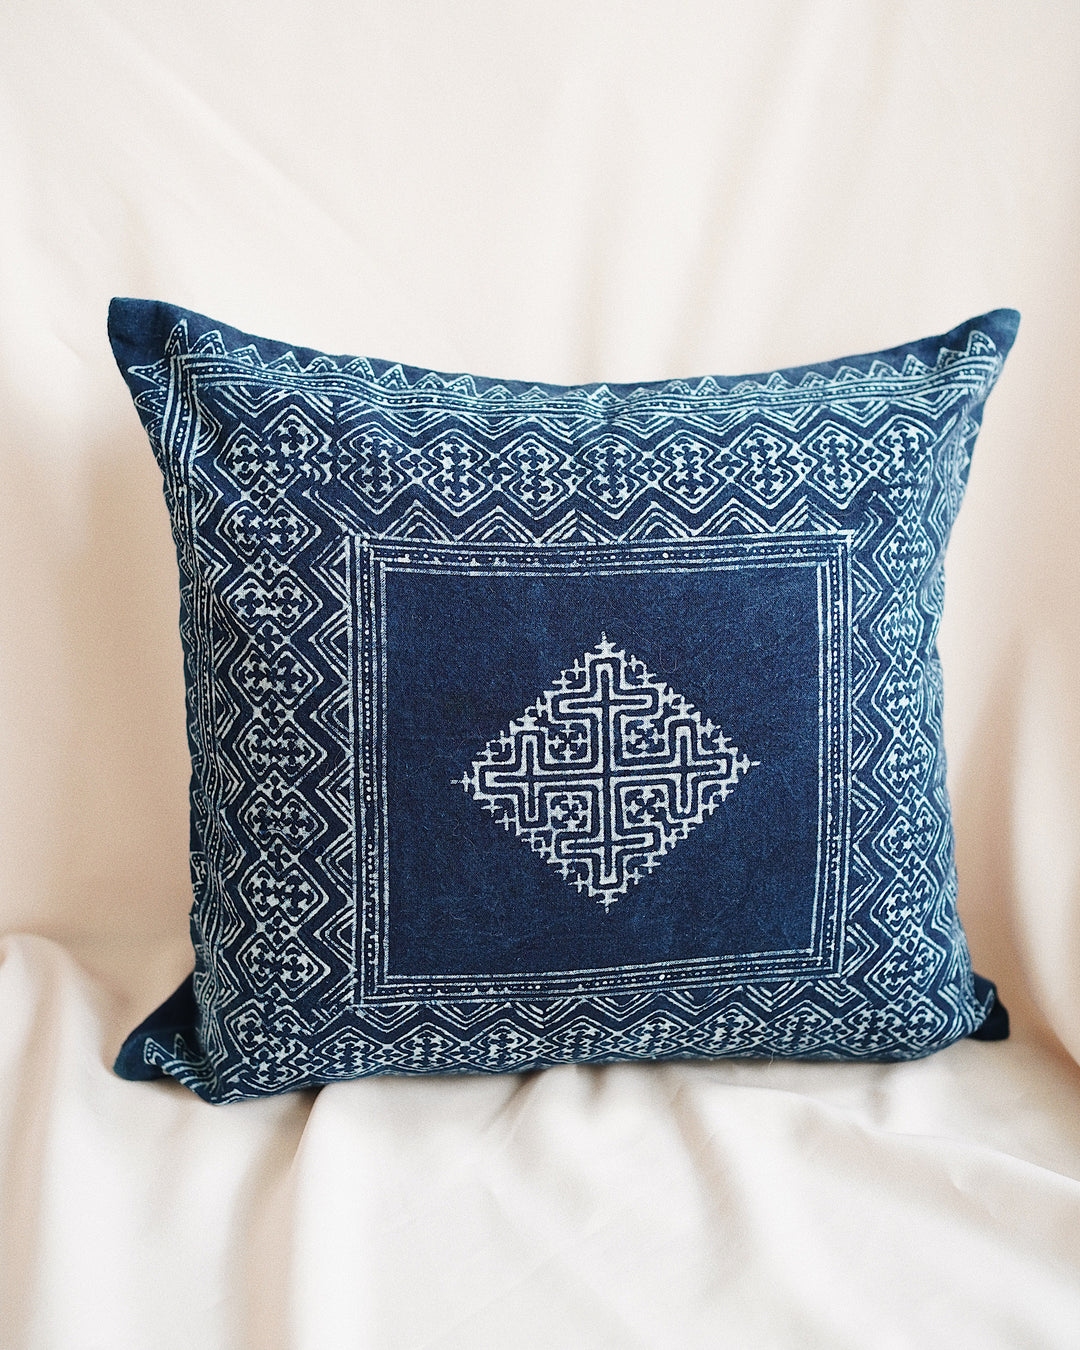 Hmong Hill Tribe Pillow Cover No.7 | Olive & Iris